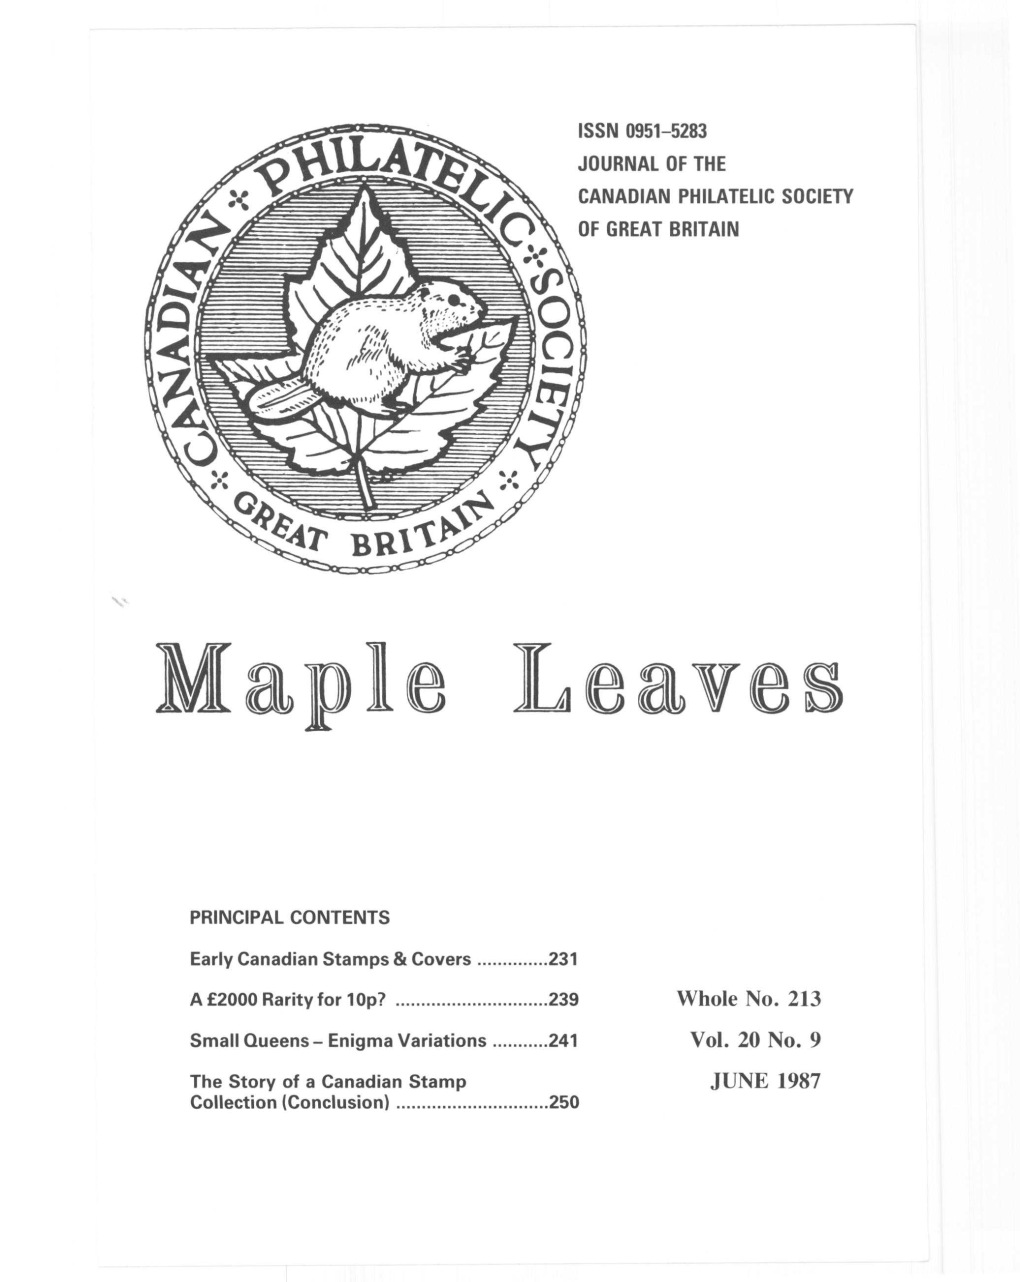 Issn 0951-5283 Journal of the Canadian Philatelic Society of Great Britain